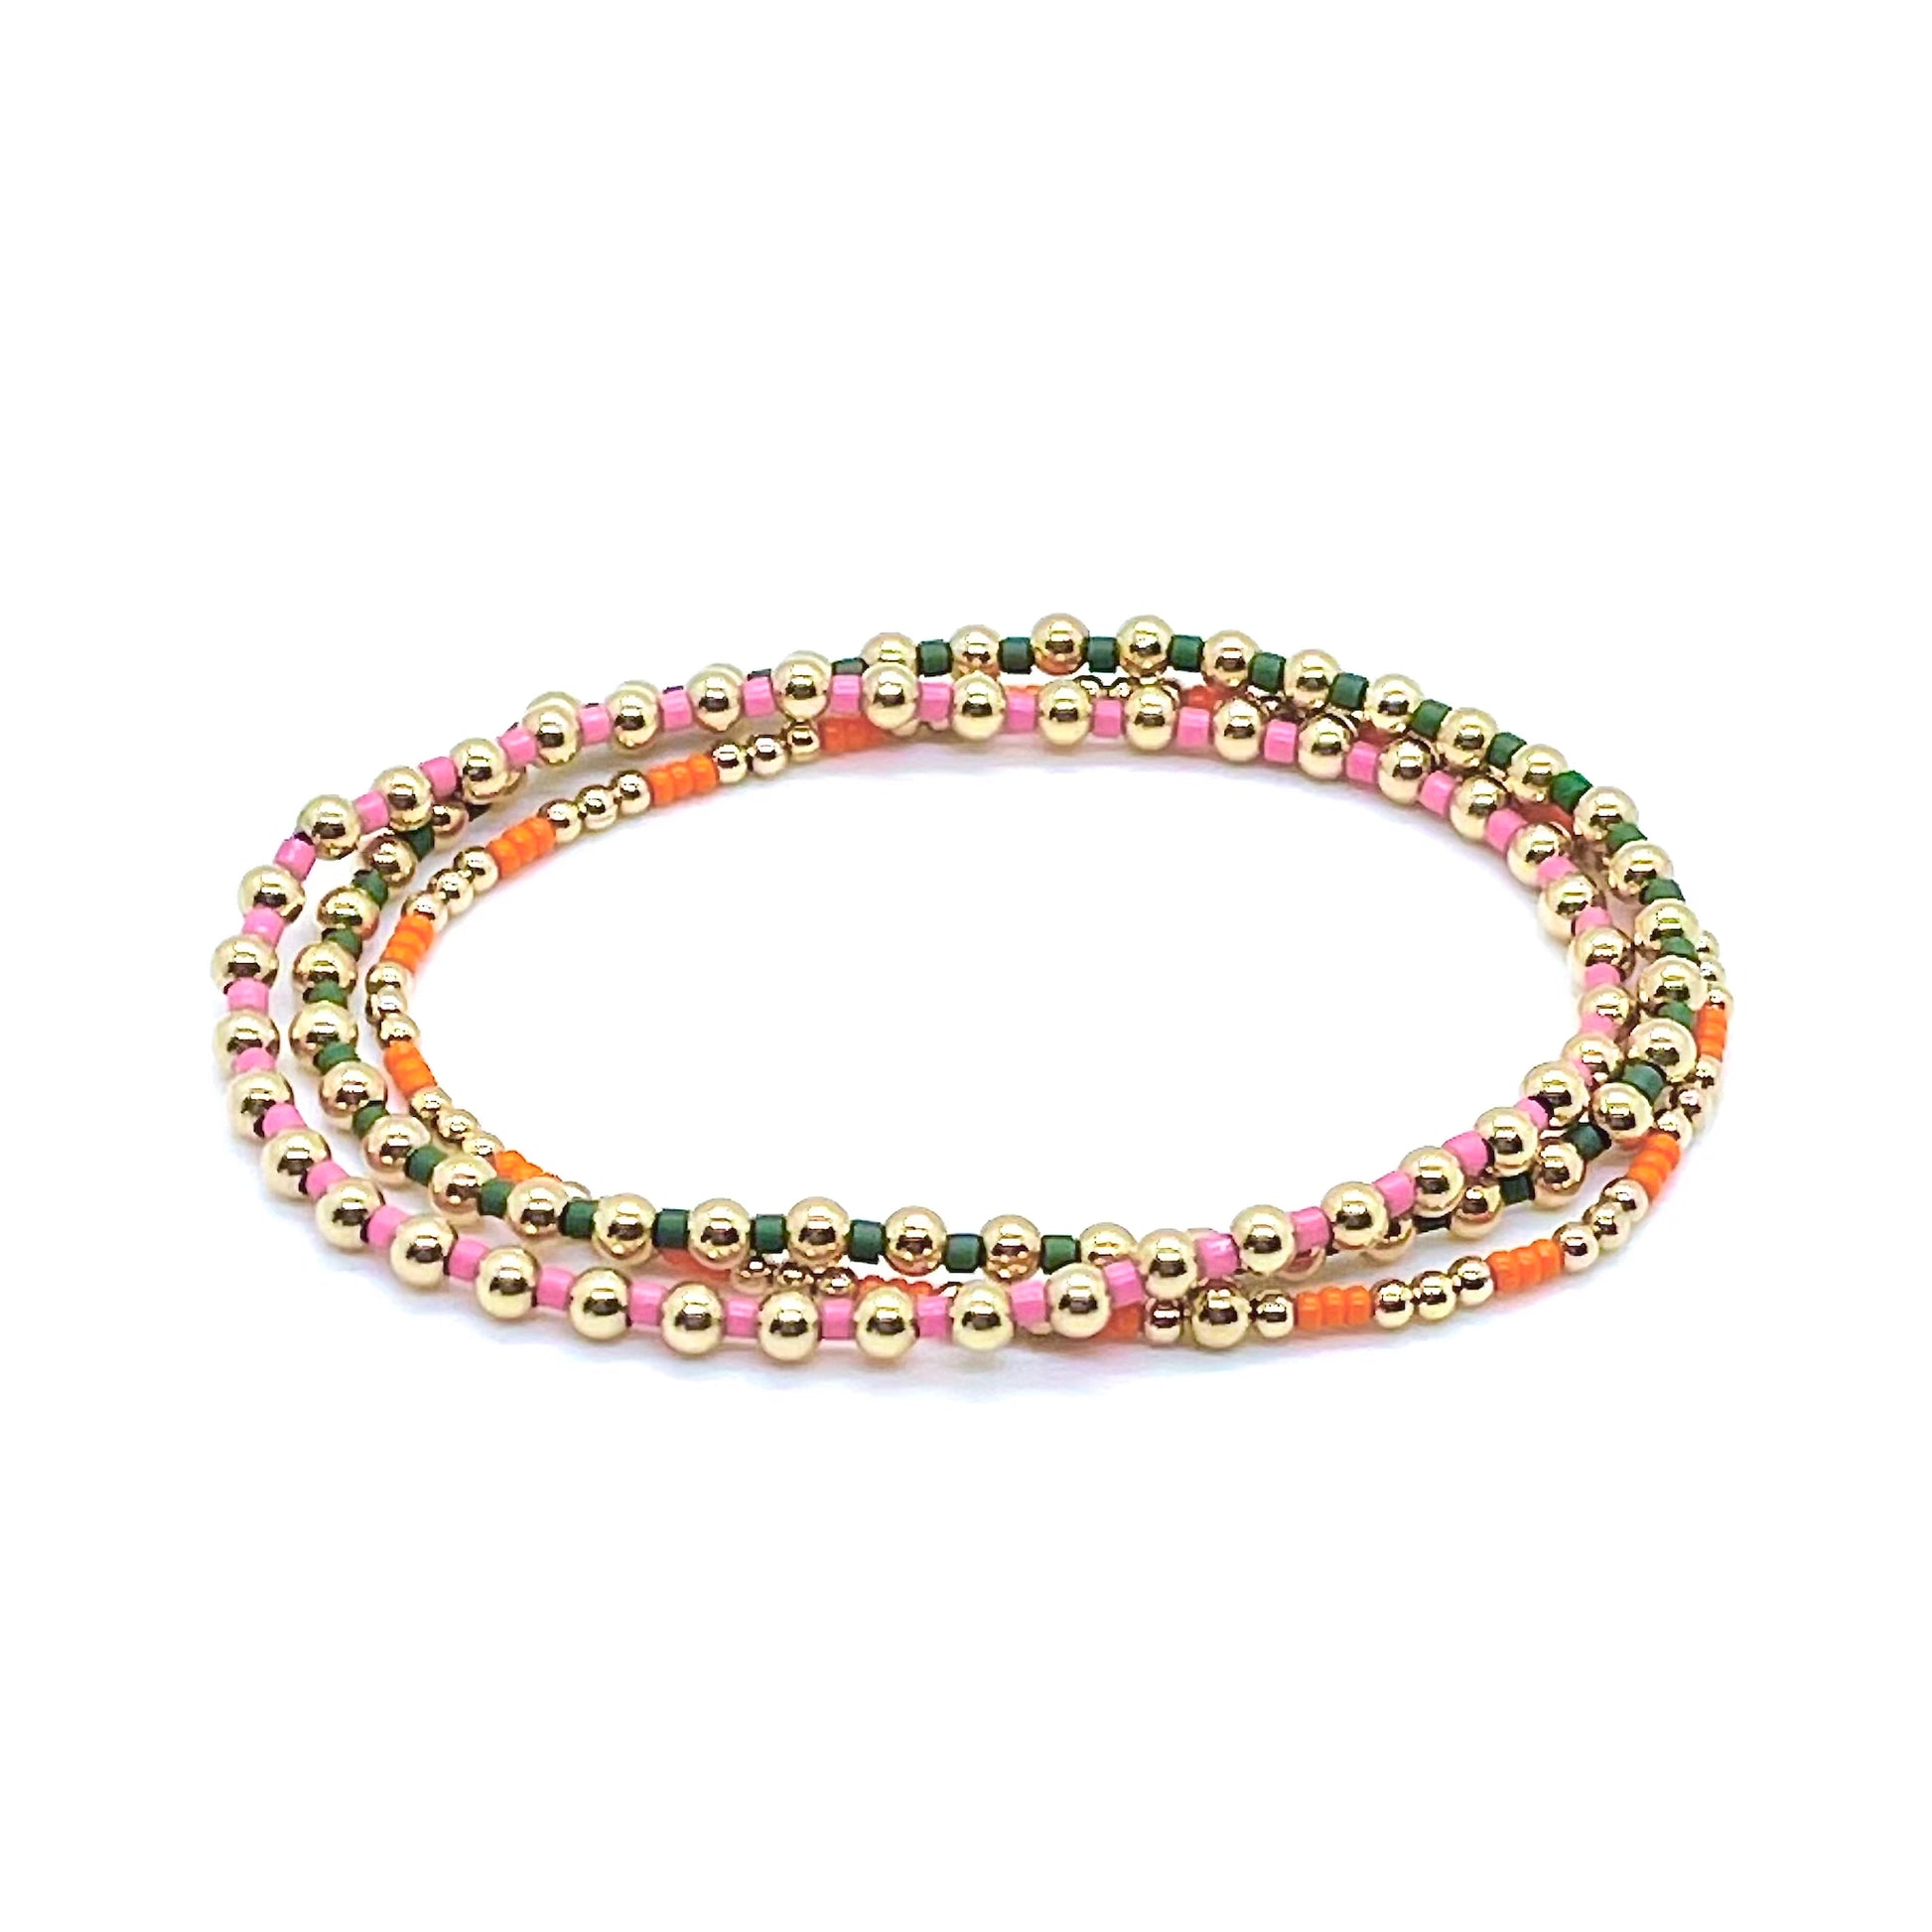 Orange, pink, and green gold ball stretch bracelet set of 3 for women. 14K gold-filled balls and glass seed beads.